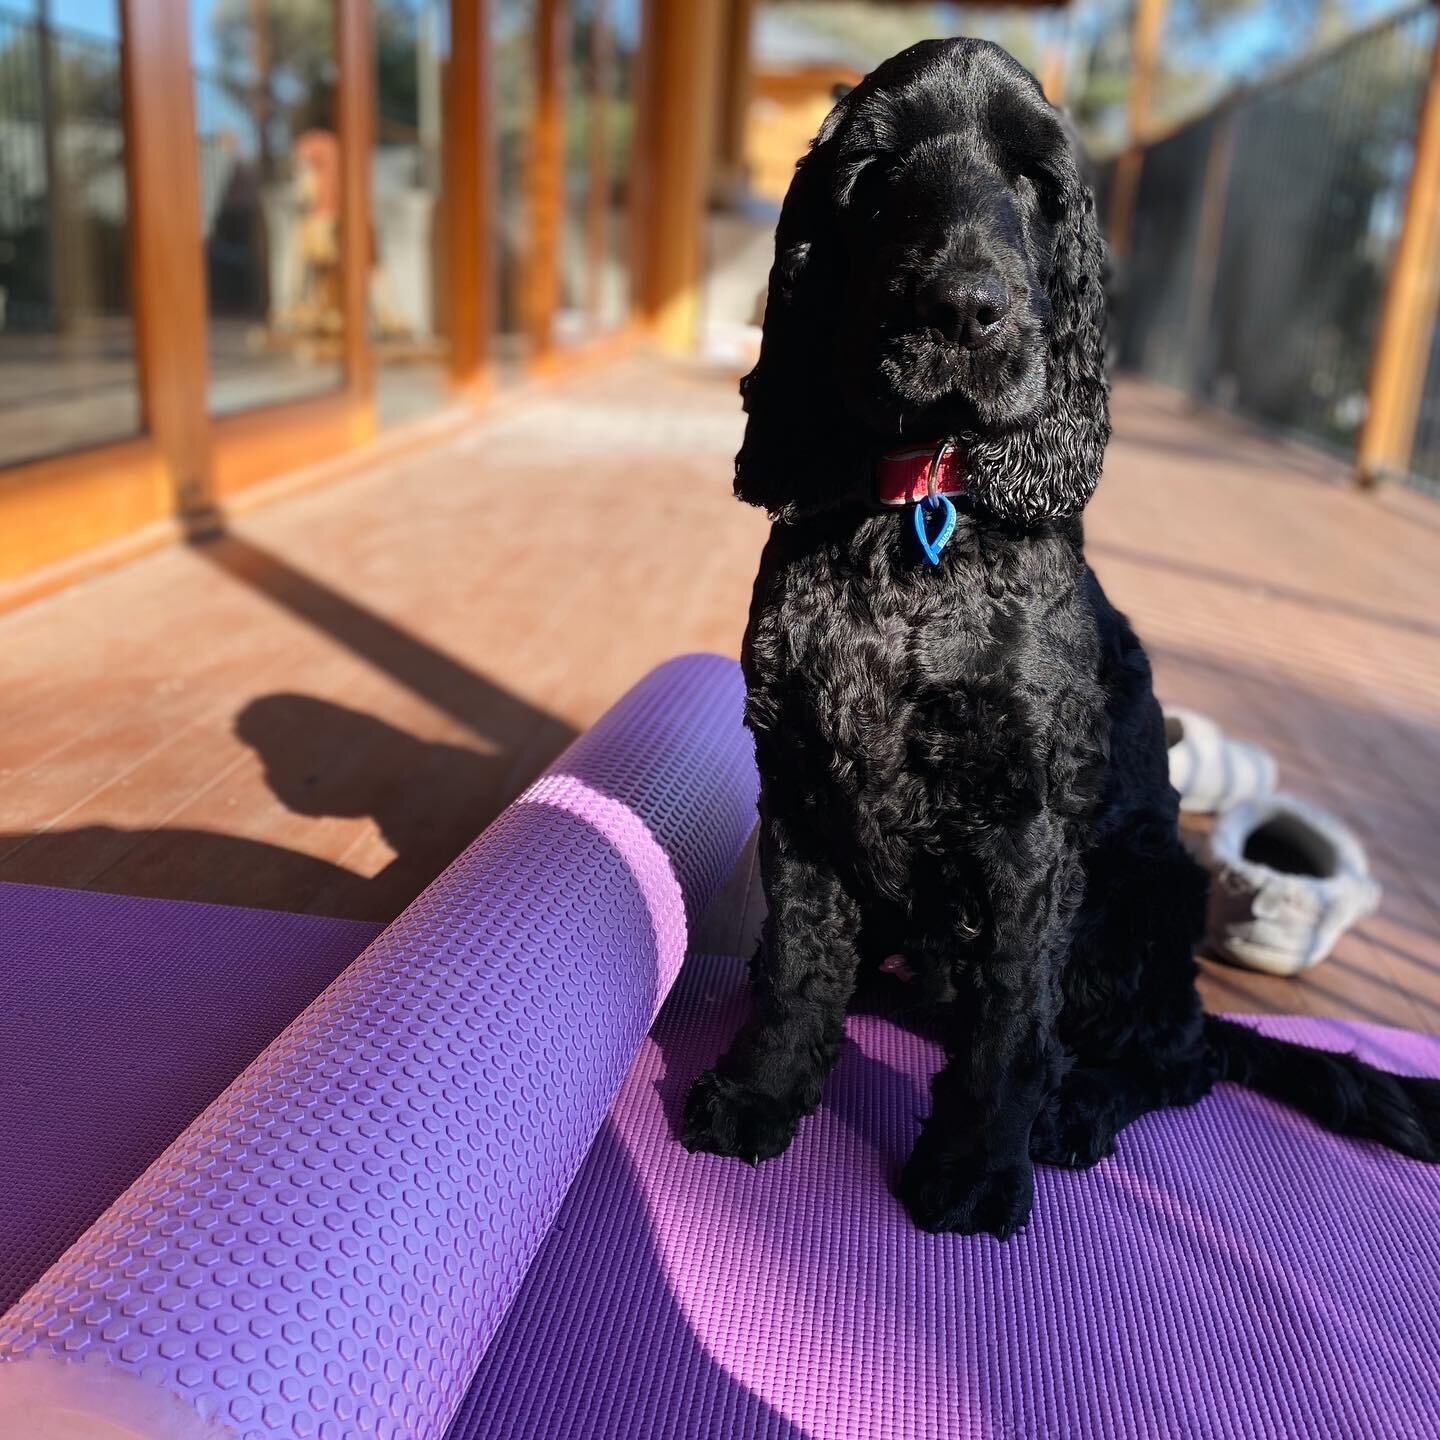 Virtual Pilates has its perks&hellip; you&rsquo;re welcome 😉
#pilateswithpets 

#puppyspam#catstagram